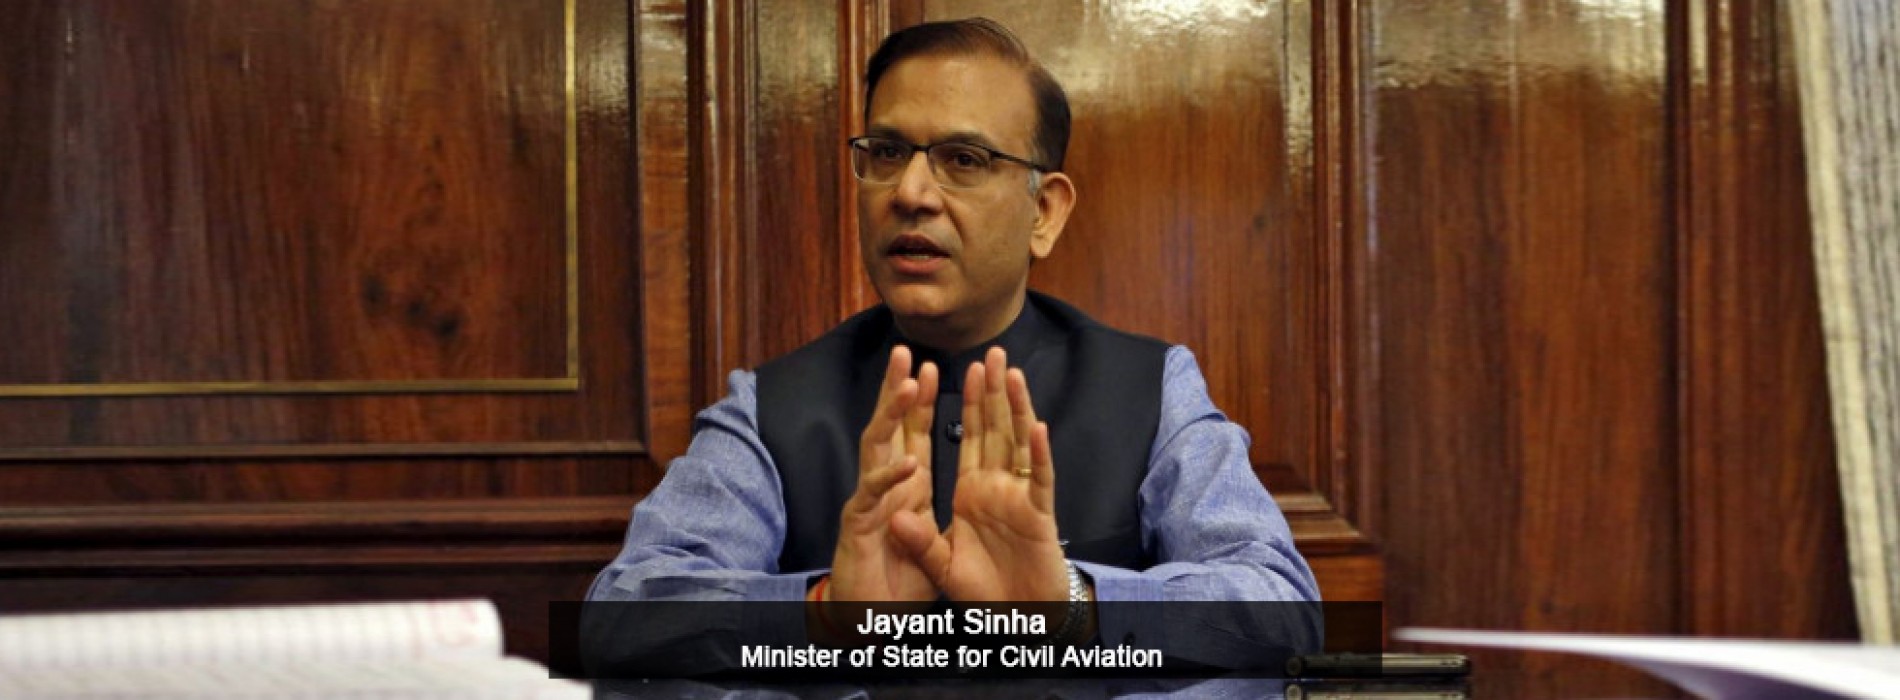 India needs Rs 2-3 lakh cr investment for new airports says Jayant Sinha